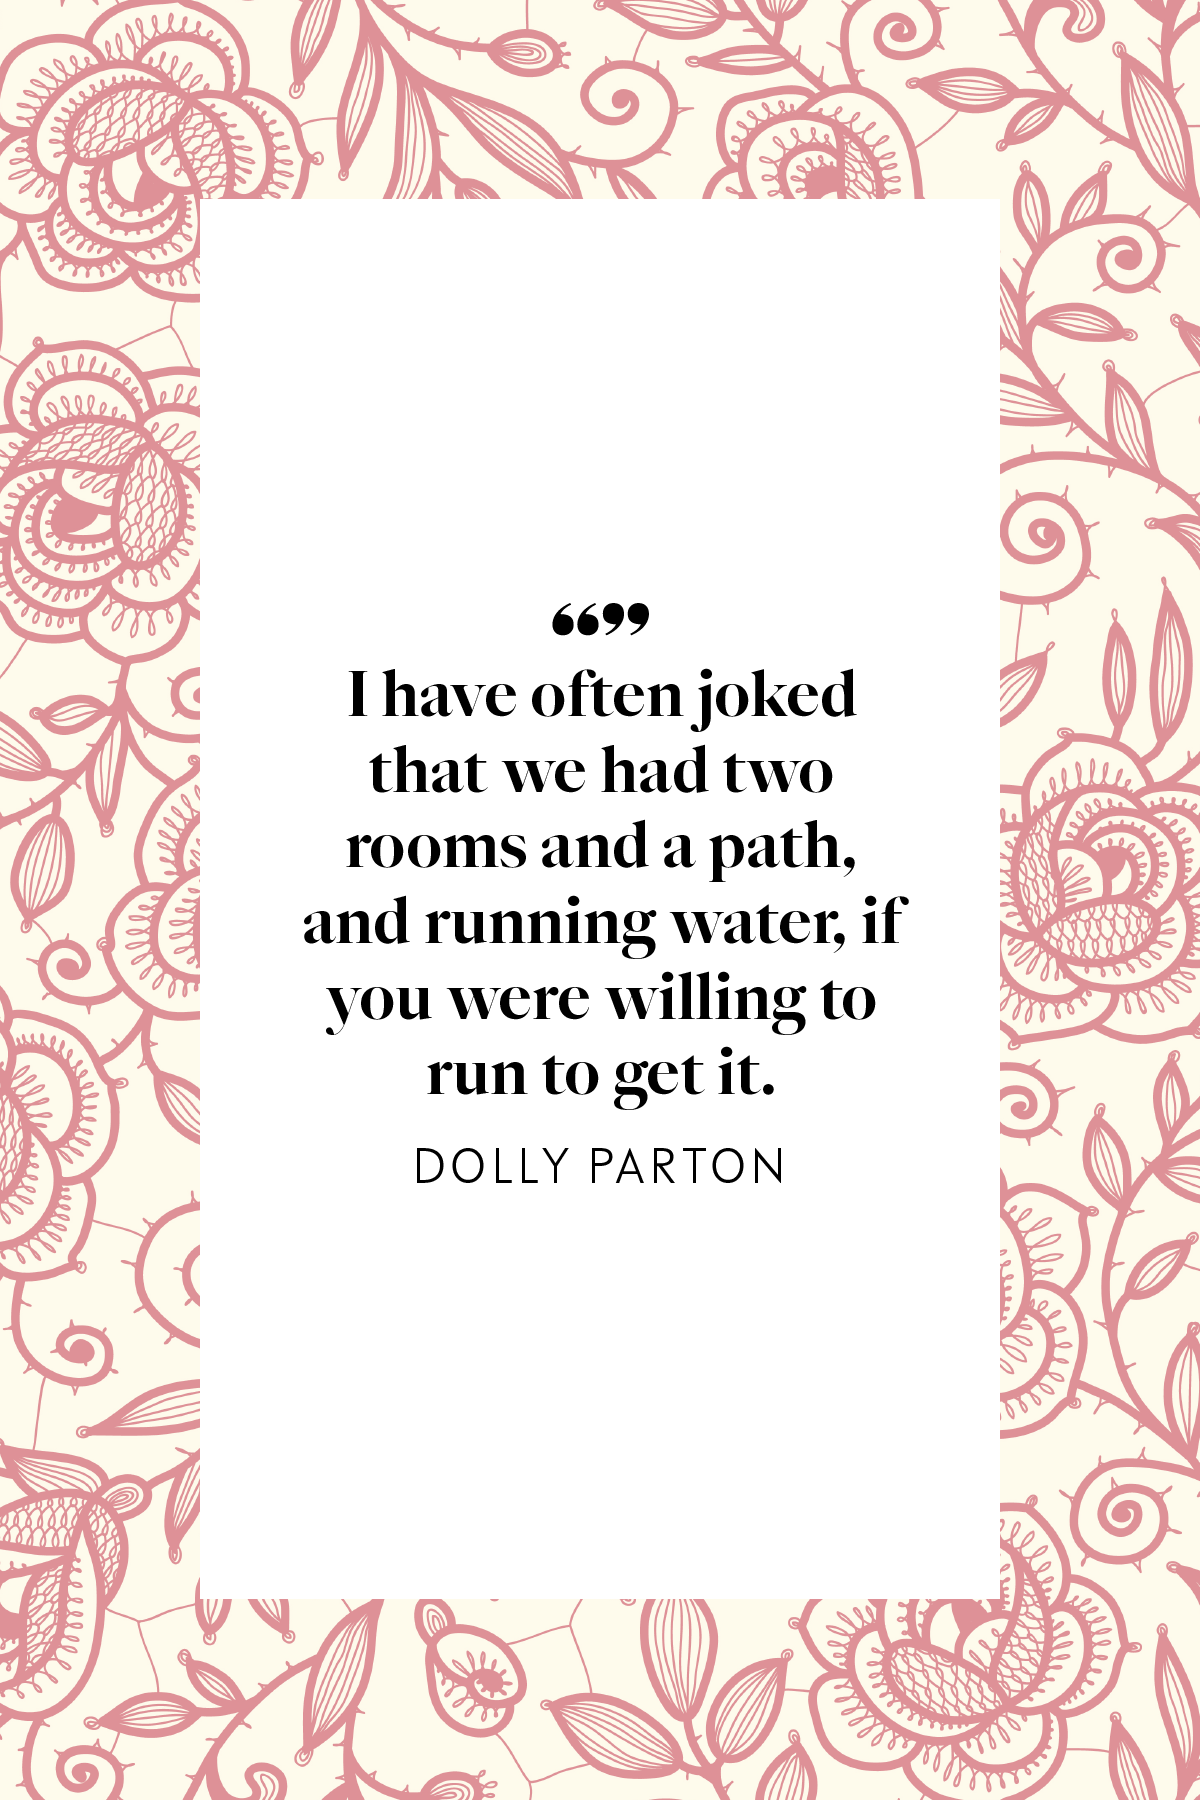 Dolly Parton Quotes Wallpapers